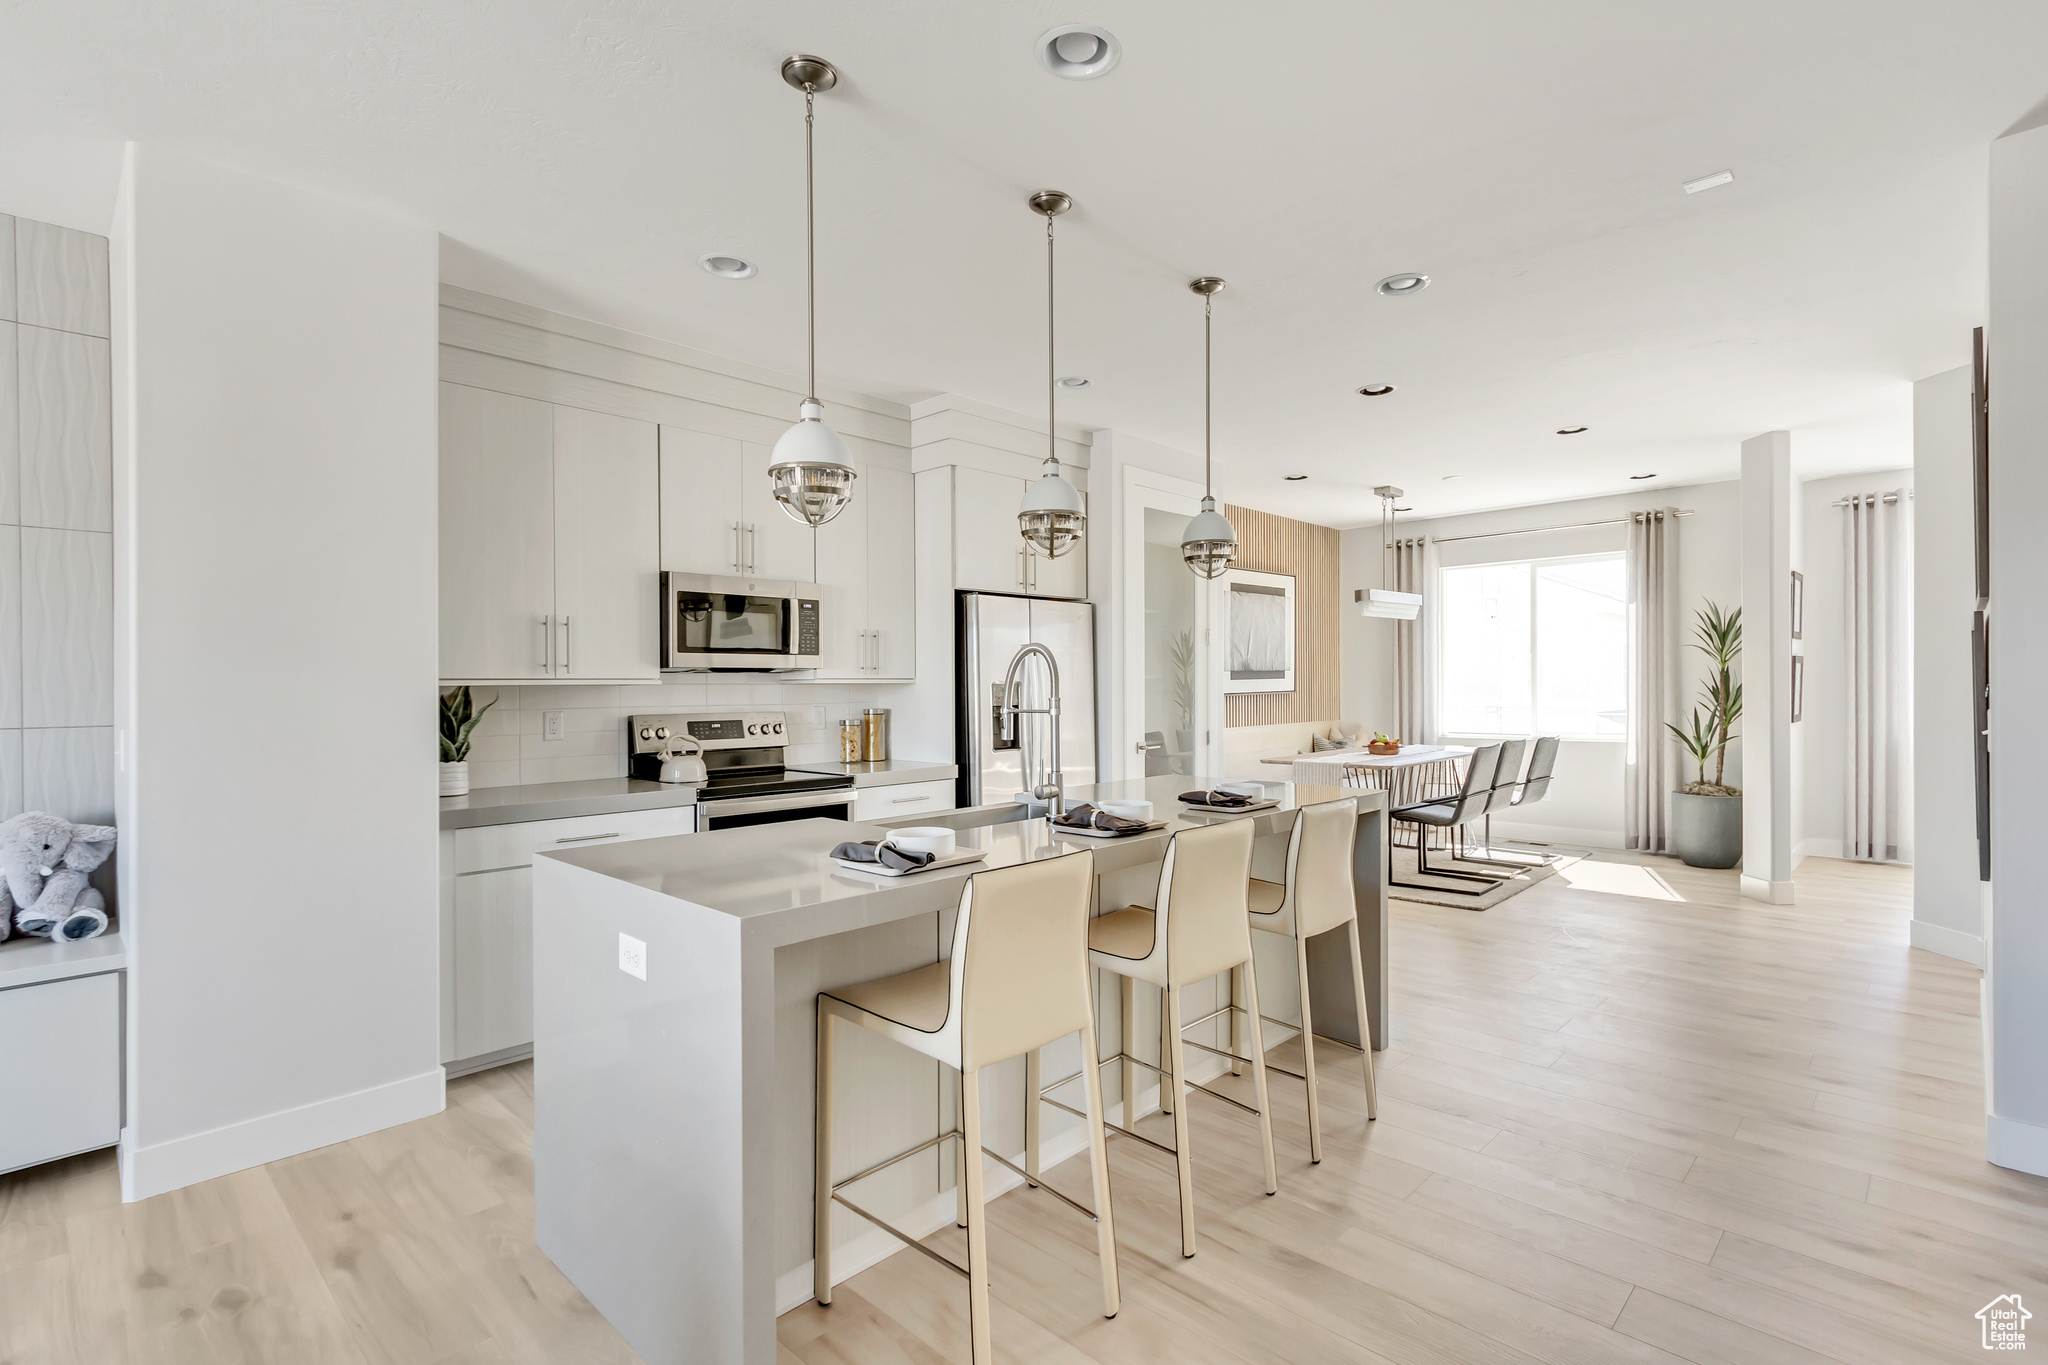 Kitchen featuring white cabinetry, appliances with stainless steel finishes, hanging light fixtures, light hardwood / wood-style flooring, and a kitchen island with sink